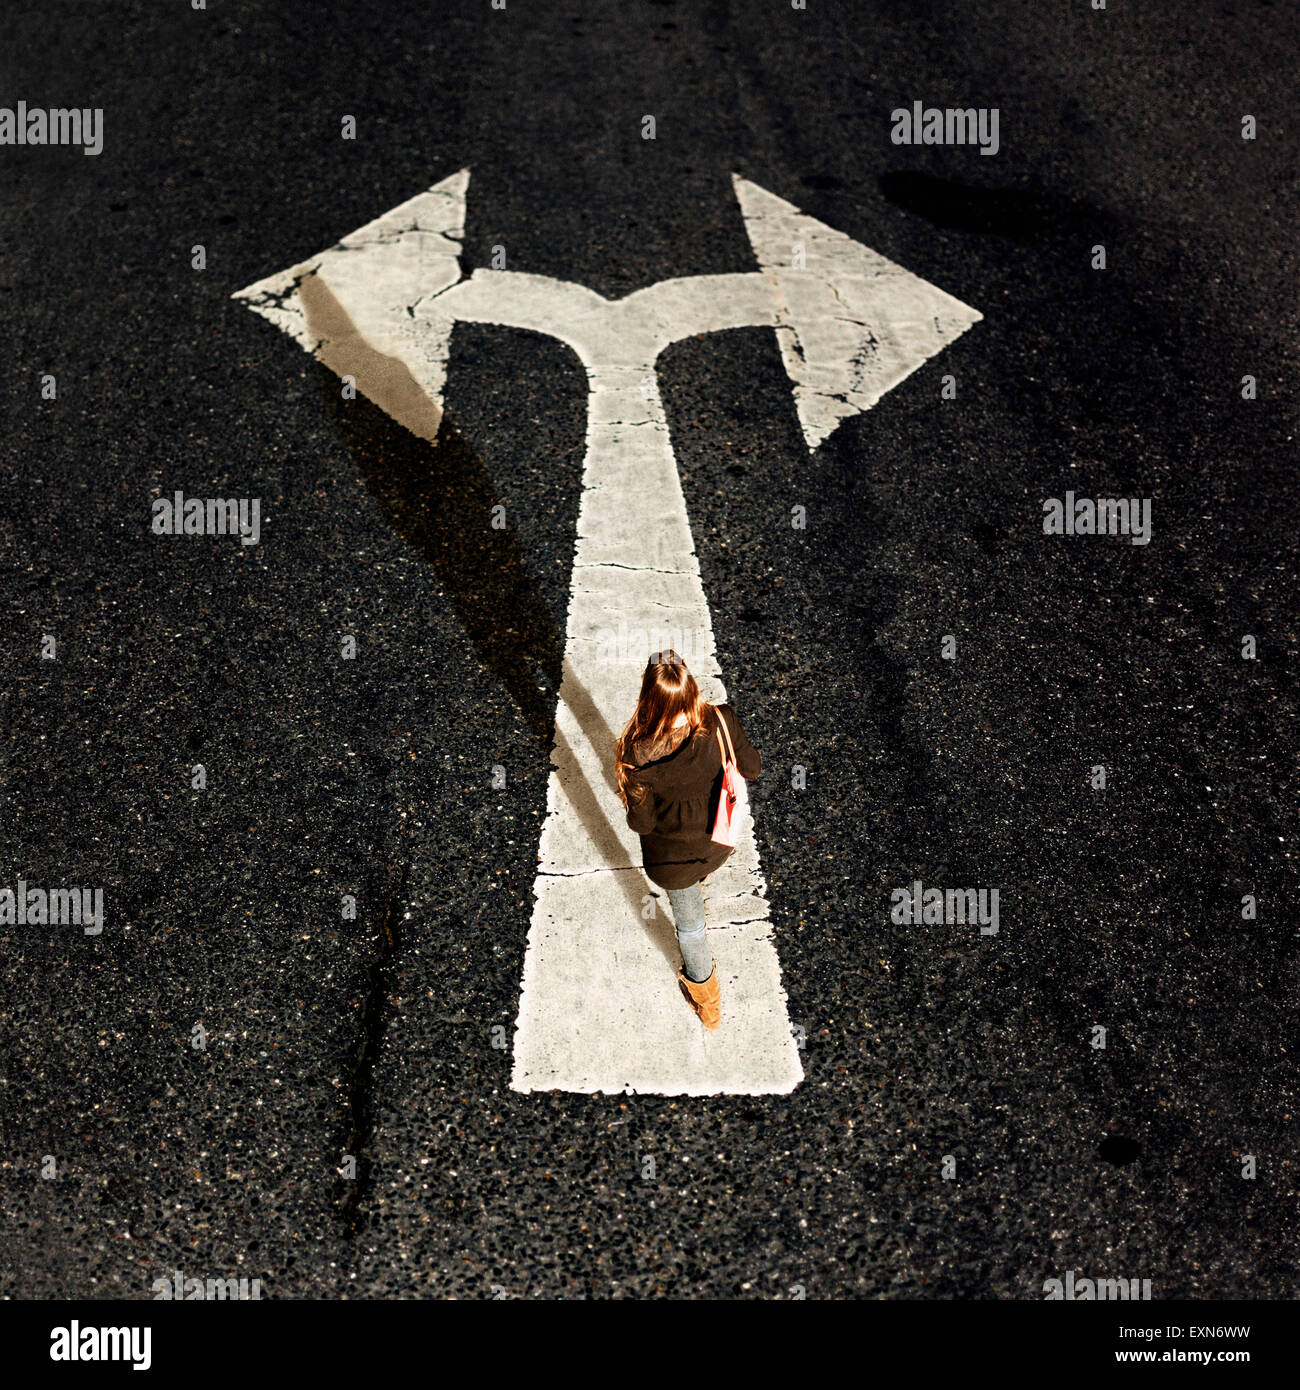 Woman walking on directional arrow of a road Stock Photo